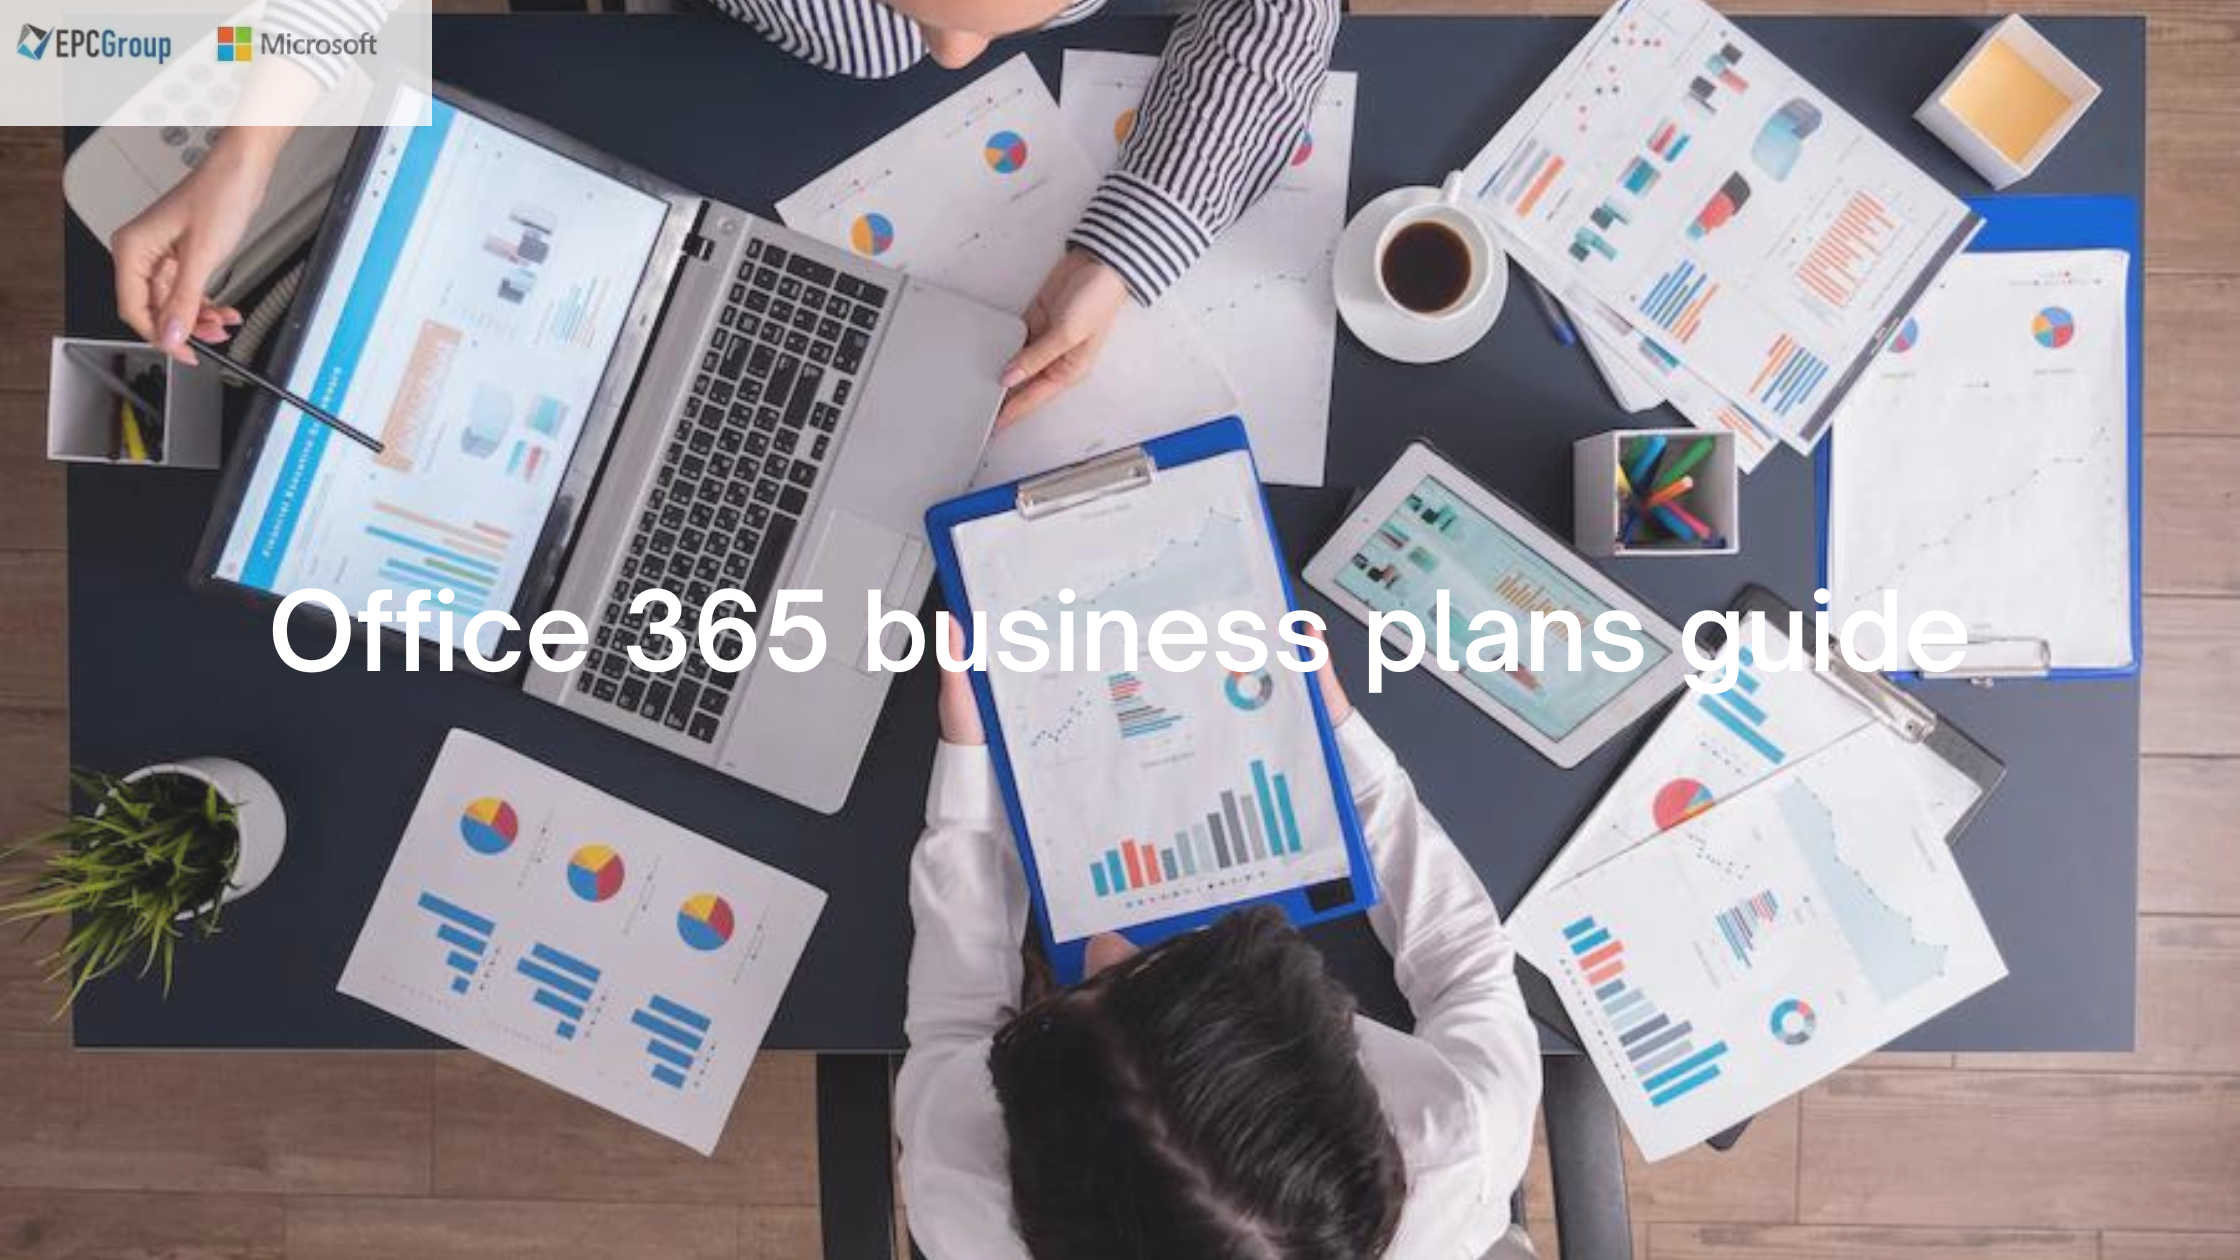 Microsoft’s Guide To The Office 365 Business Plans - thumb image